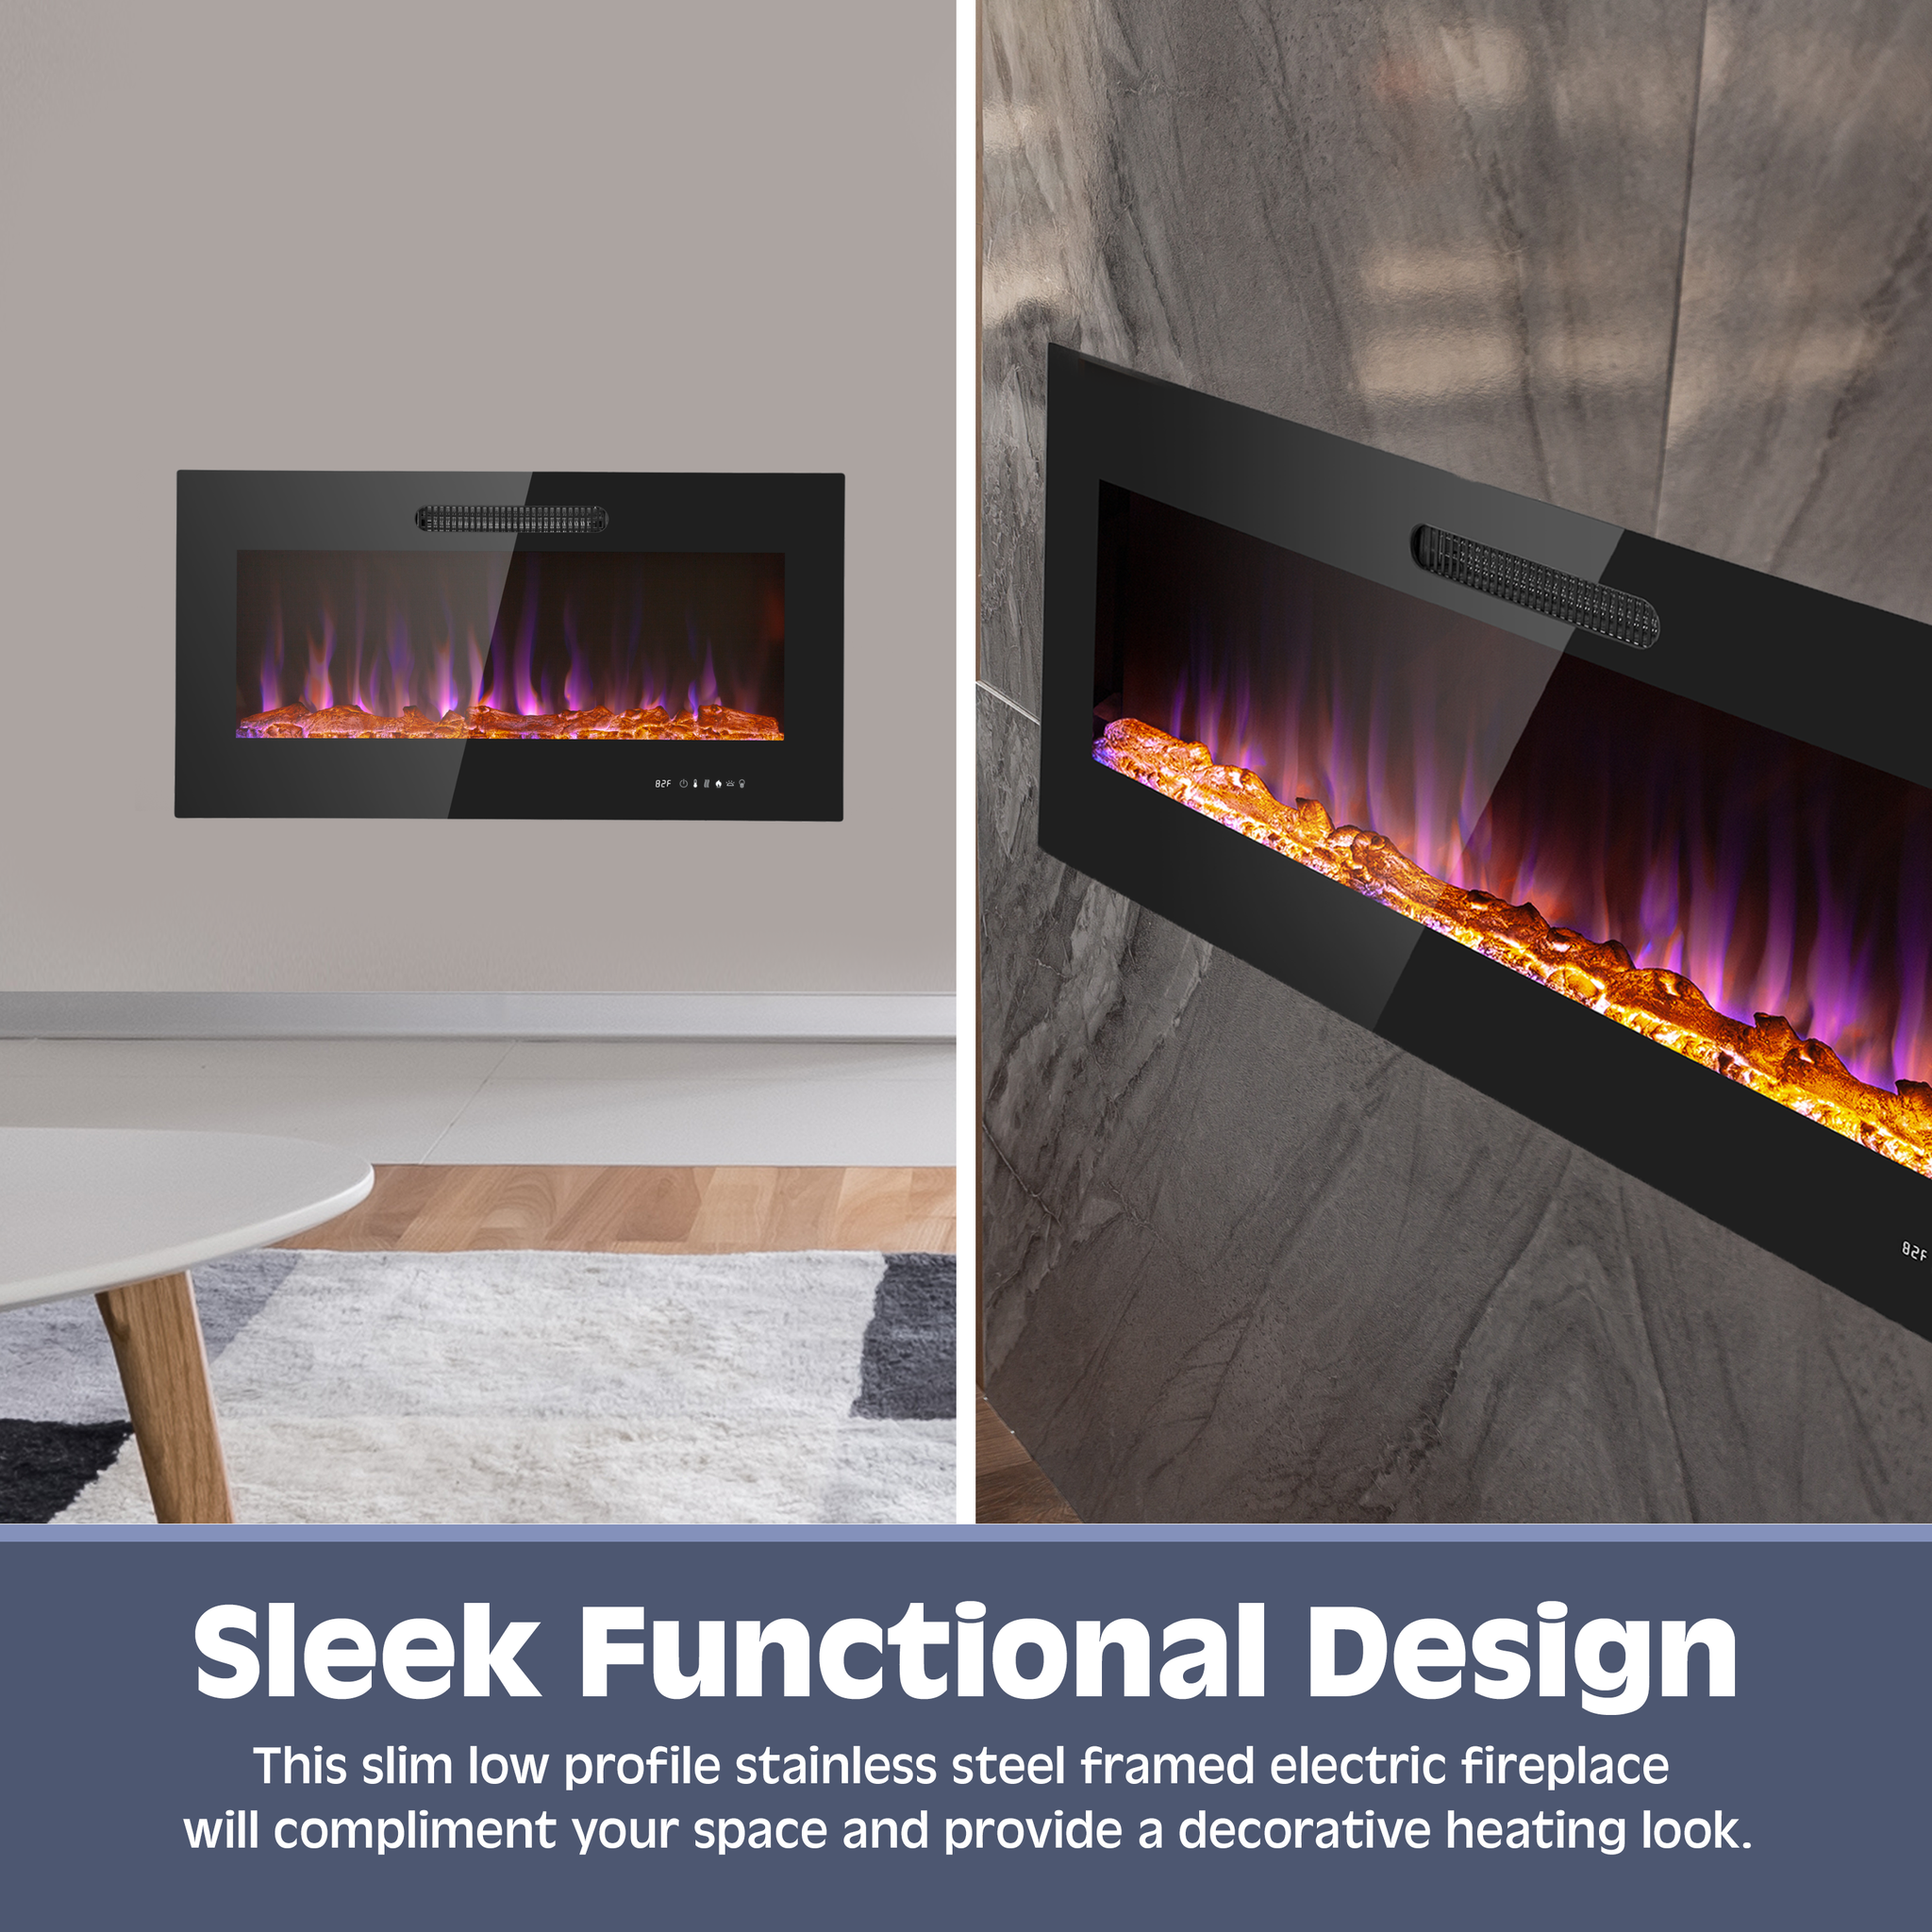 42 Inch LED Slim Design Electric Fireplace Insert and Wall Mounted Fireplace with 1500 Watt Heater, Log & Crystal Ember Options, Adjustable Realistic Flame and Remote Control by Prominence Home